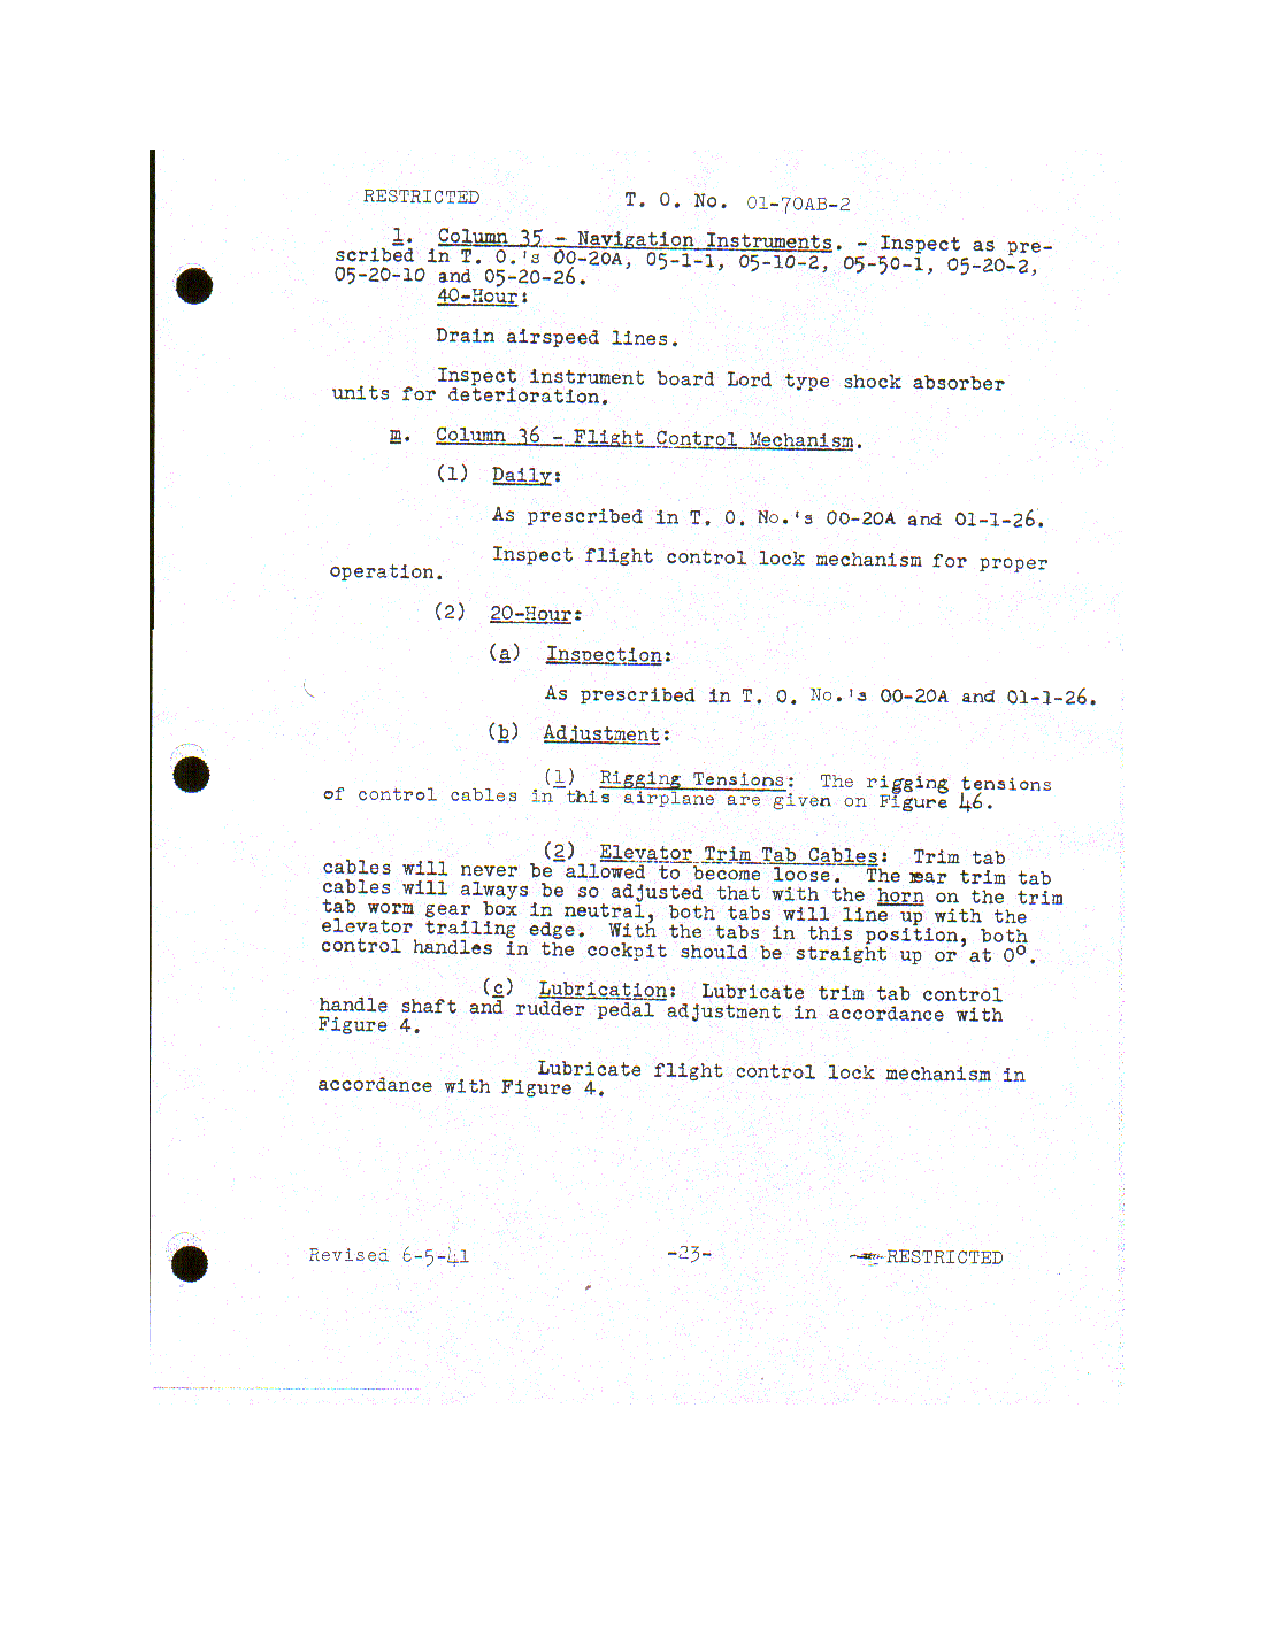 Sample page 30 from AirCorps Library document: Service Instructions - PT-13